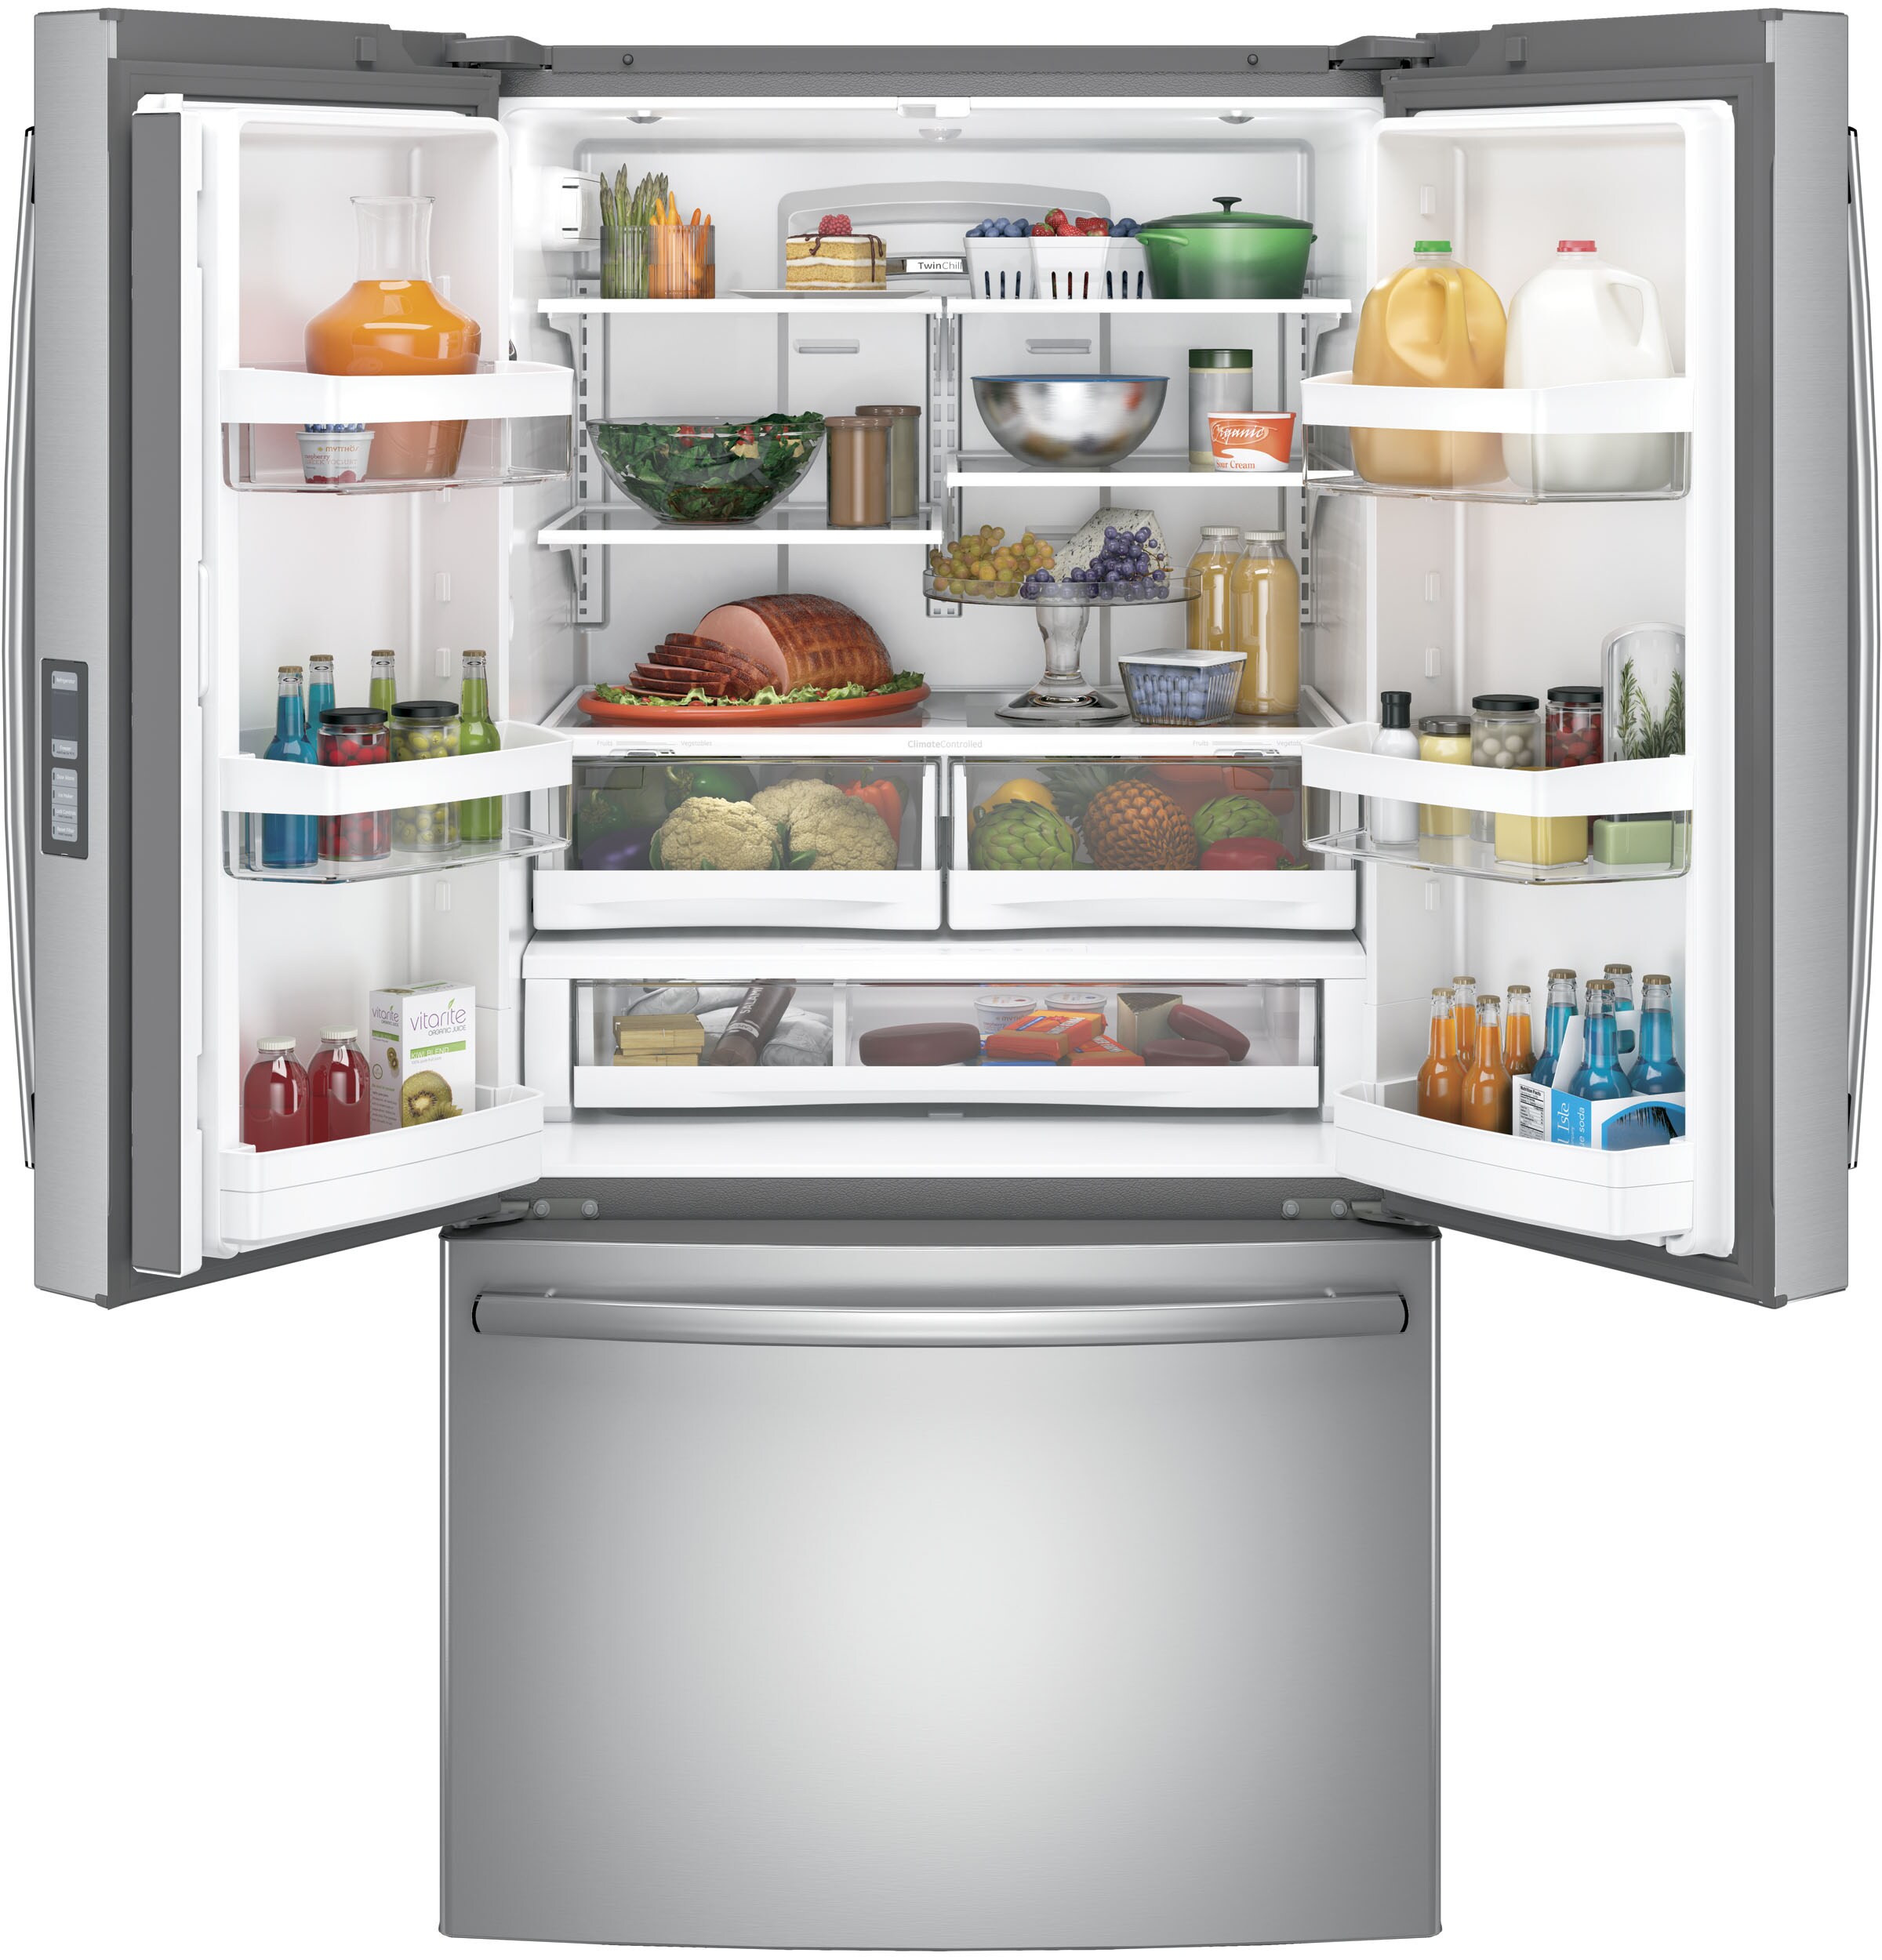 GE 28.7-cu ft French Door Refrigerator with Ice Maker (Stainless Steel ...